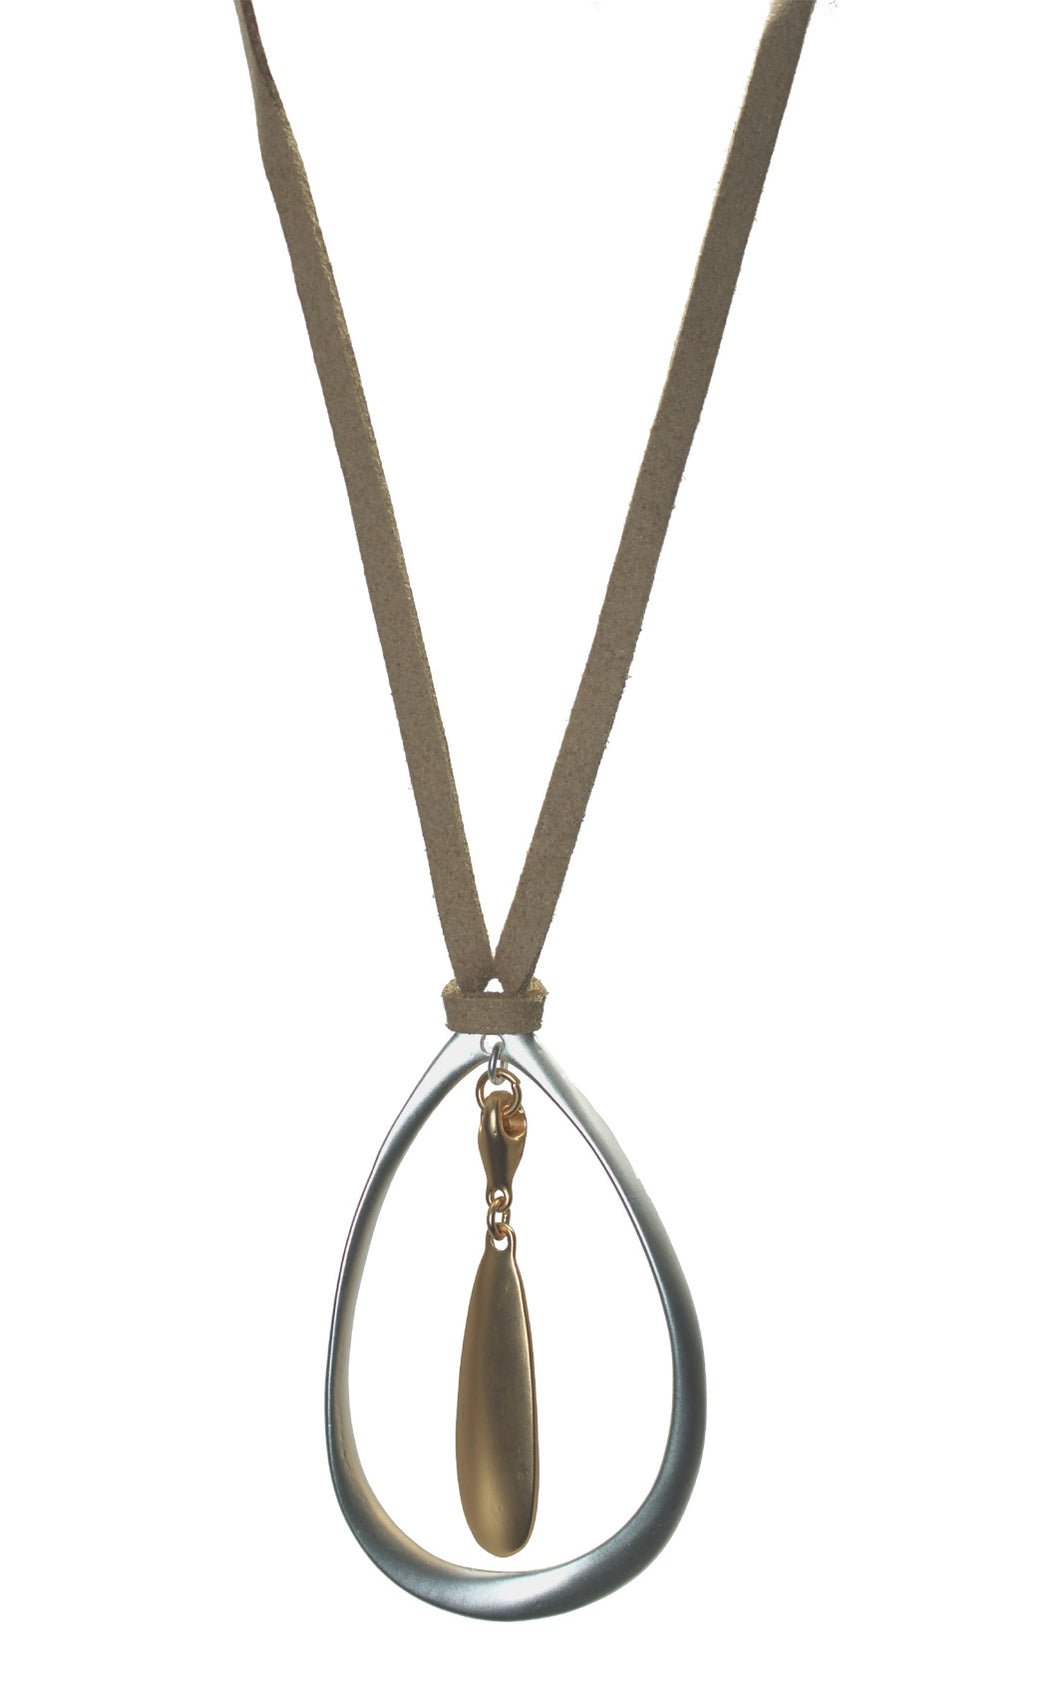 Matt Silver/gold pendant with beige leather